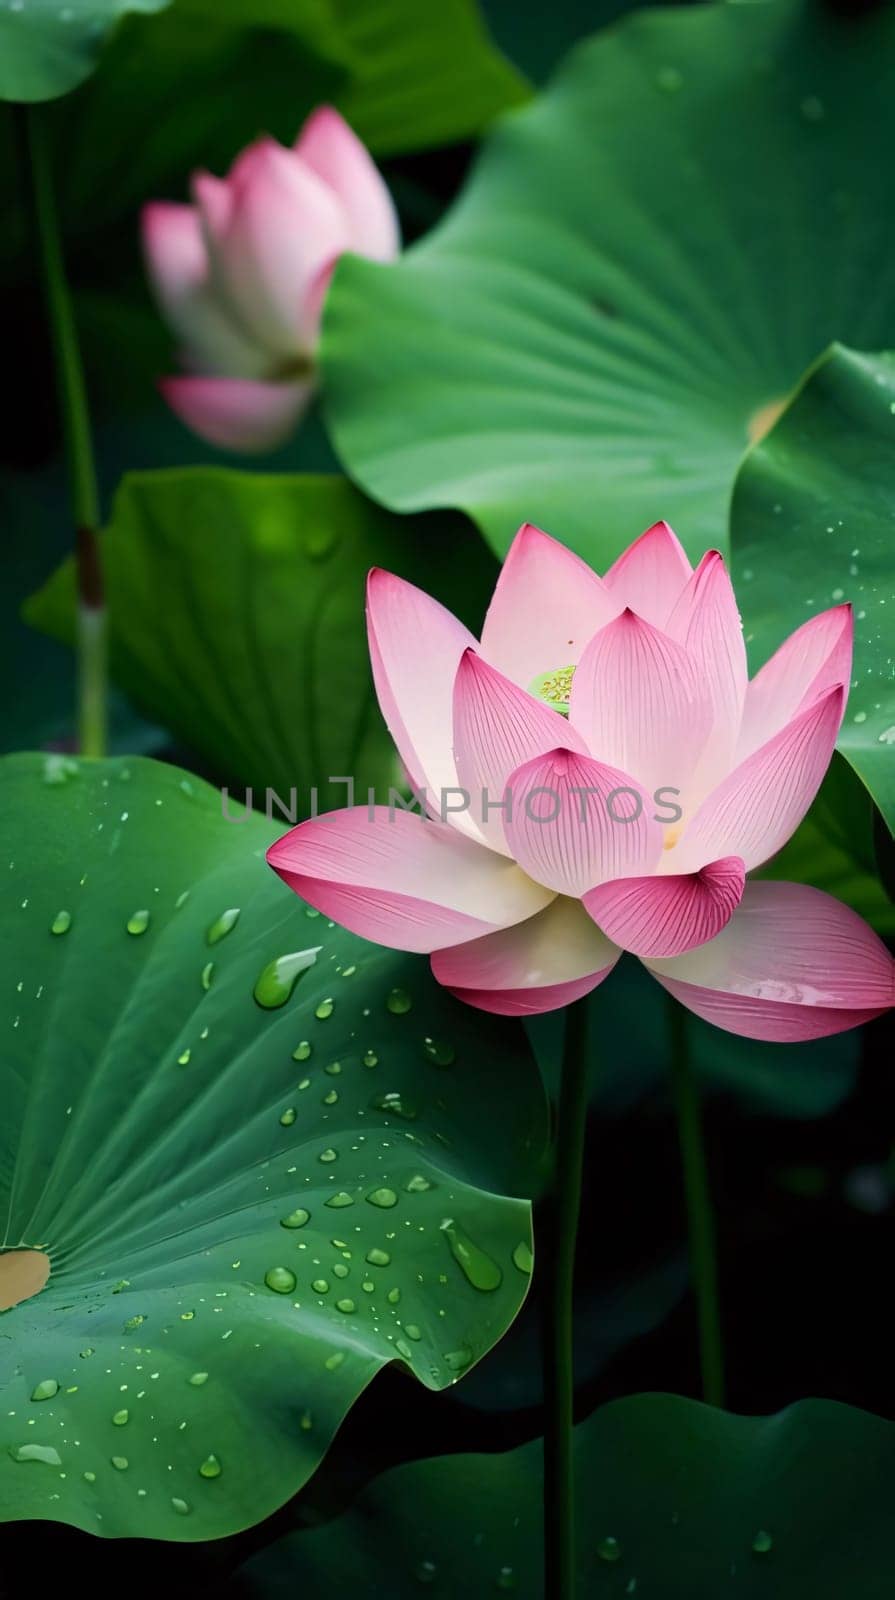 Pink water lilies and green leaves with Drops of water, dew, rain. Flowering flowers, a symbol of spring, new life. by ThemesS